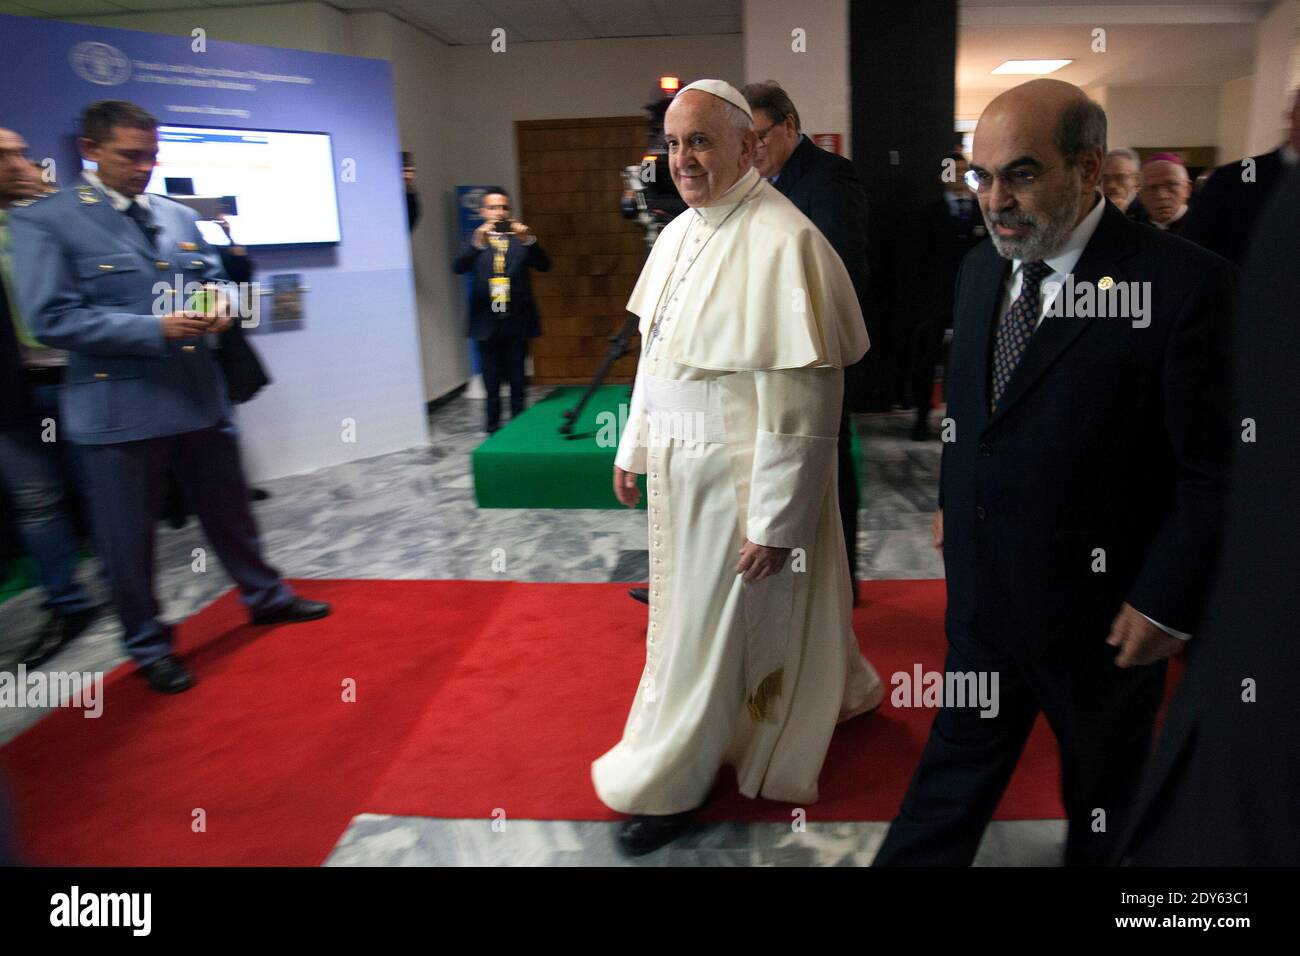 Pope Francis is welcomed by U.N. Food and Agriculture Organization (FAO)  Director-General Jose Graziano da Silva as he arrives to attend the 2nd  International Conference on Nutrition and Growth hosted by the